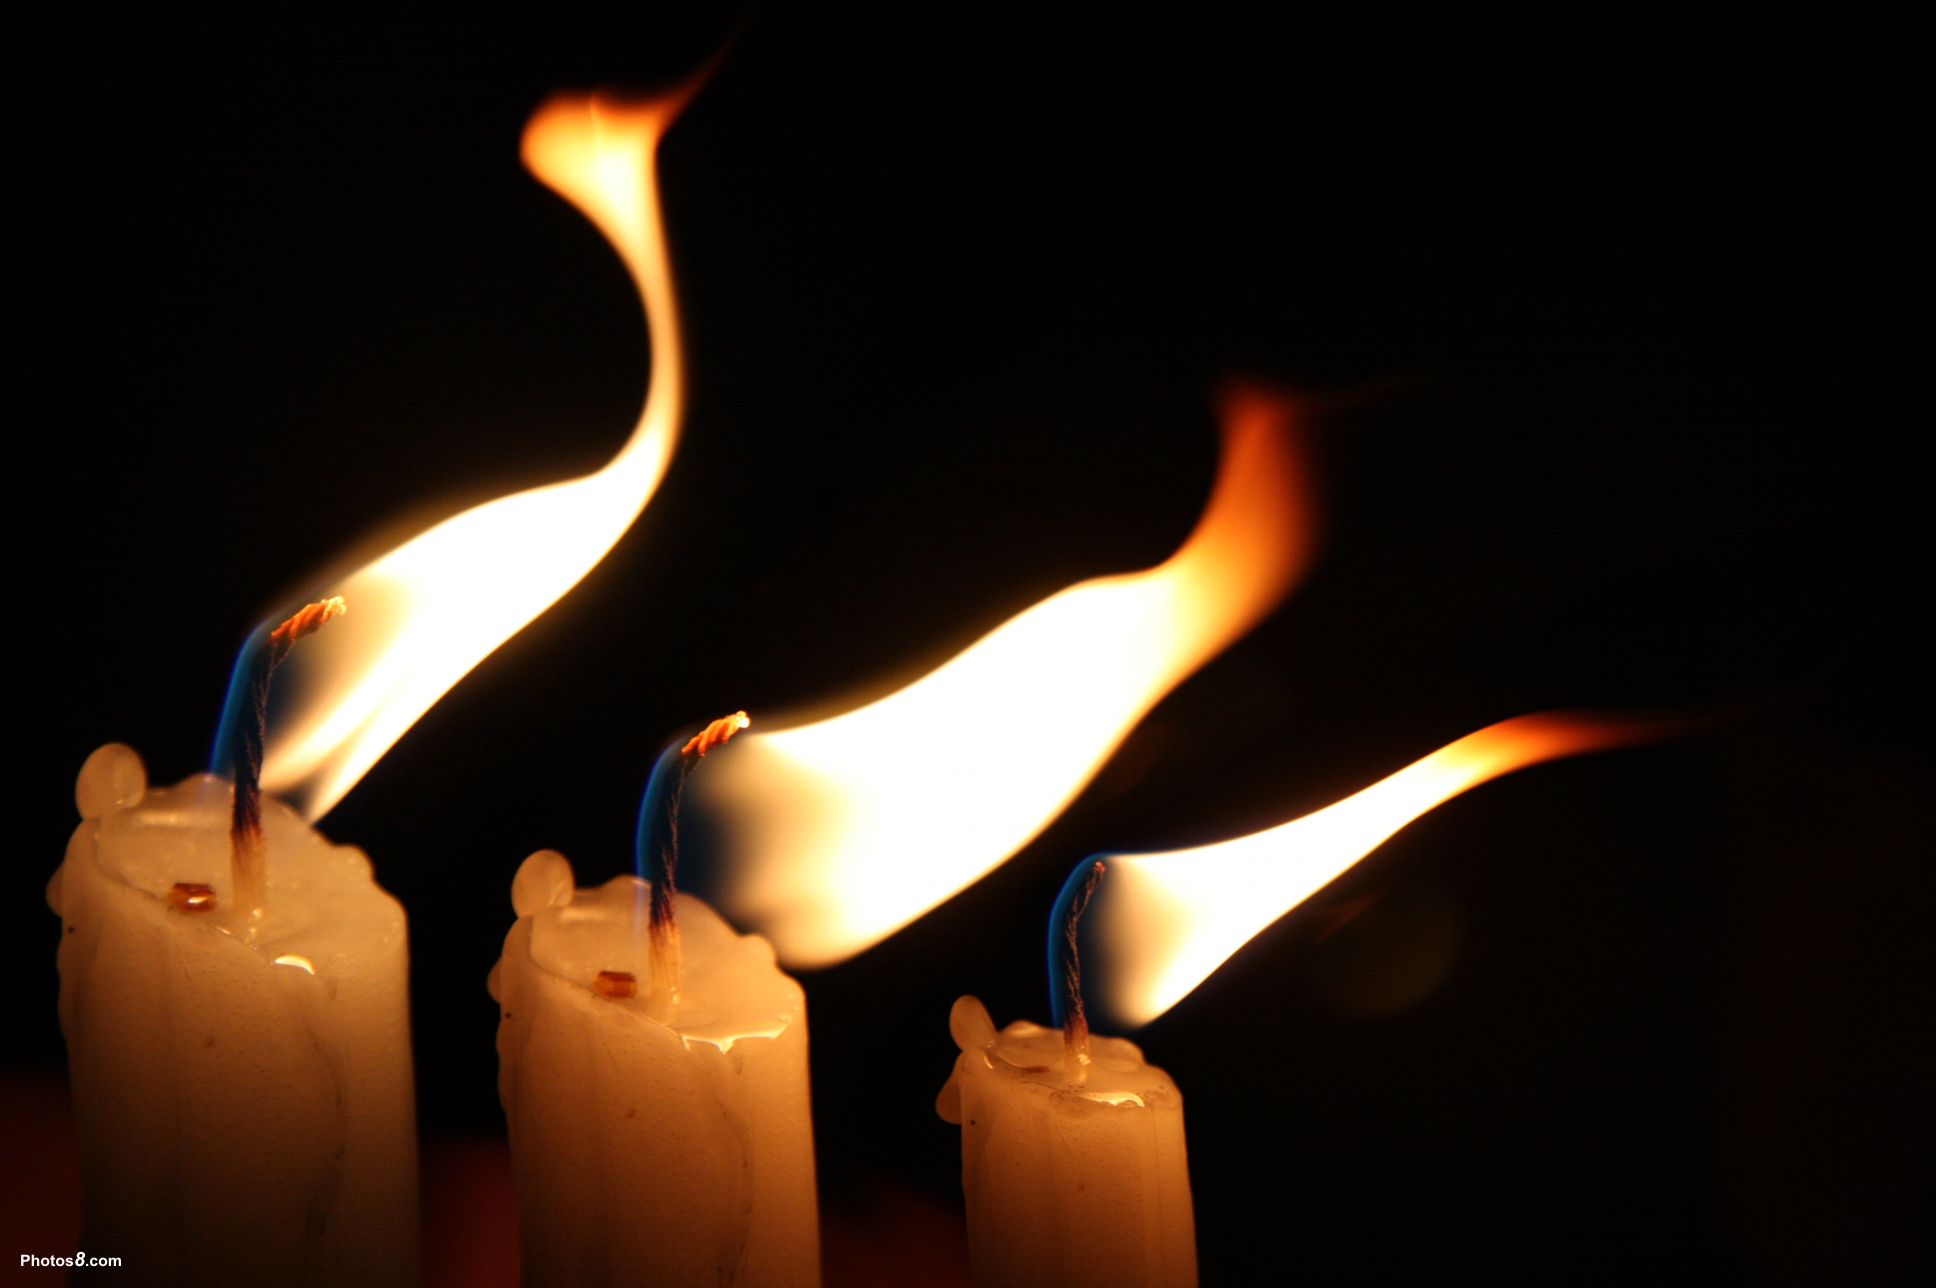 File:Candles flame in the wind-other.jpg - Wikimedia Commons